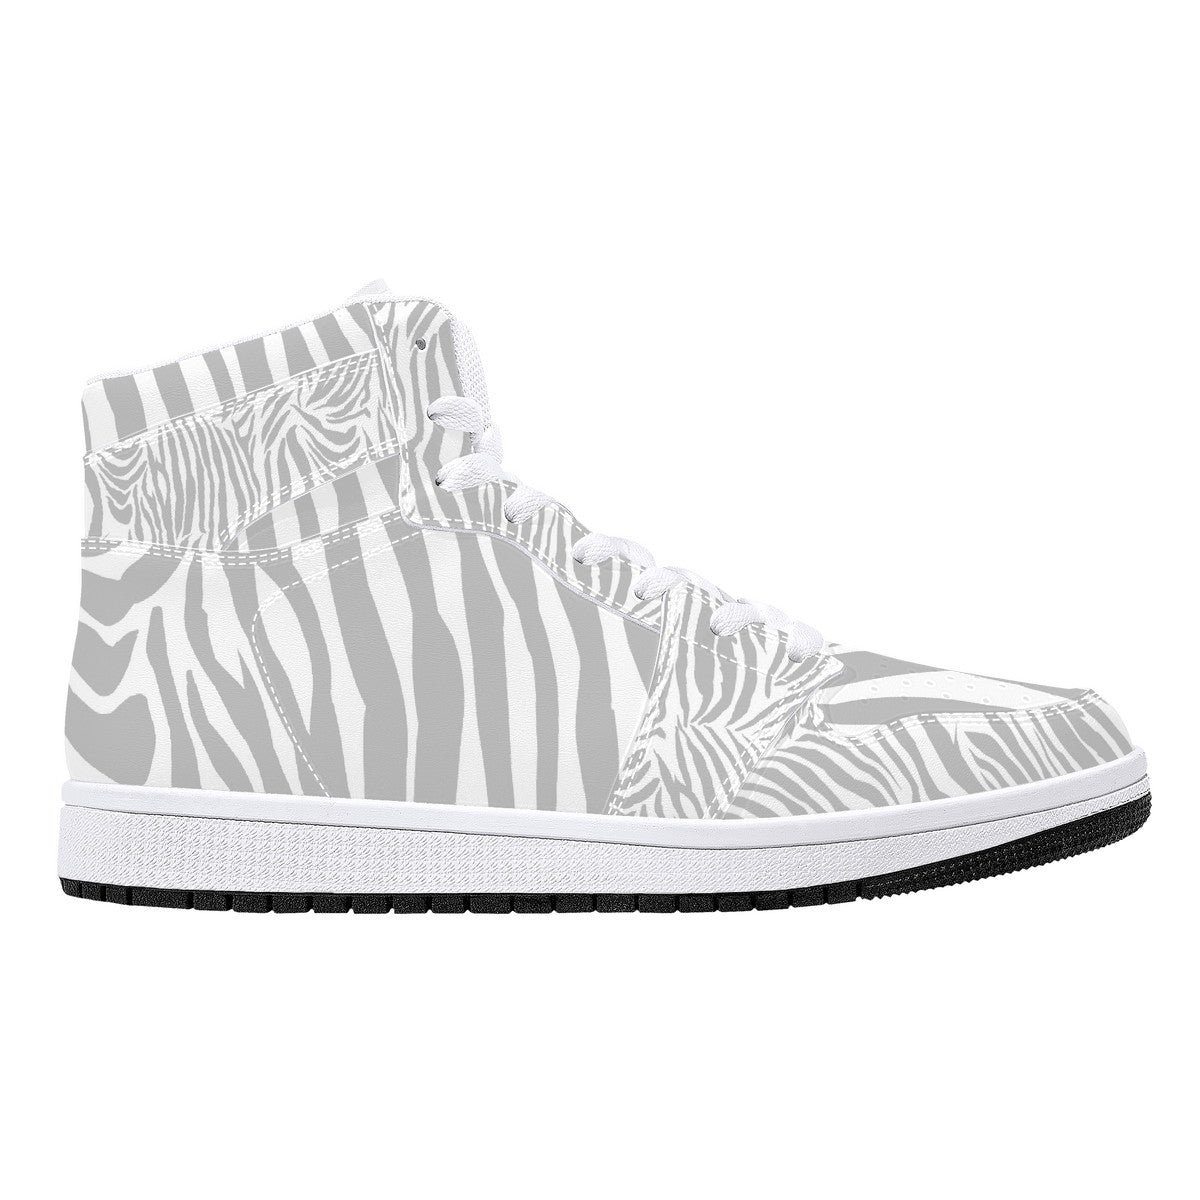 "Nix Zebra" High-Top Synthetic Leather Sneakers